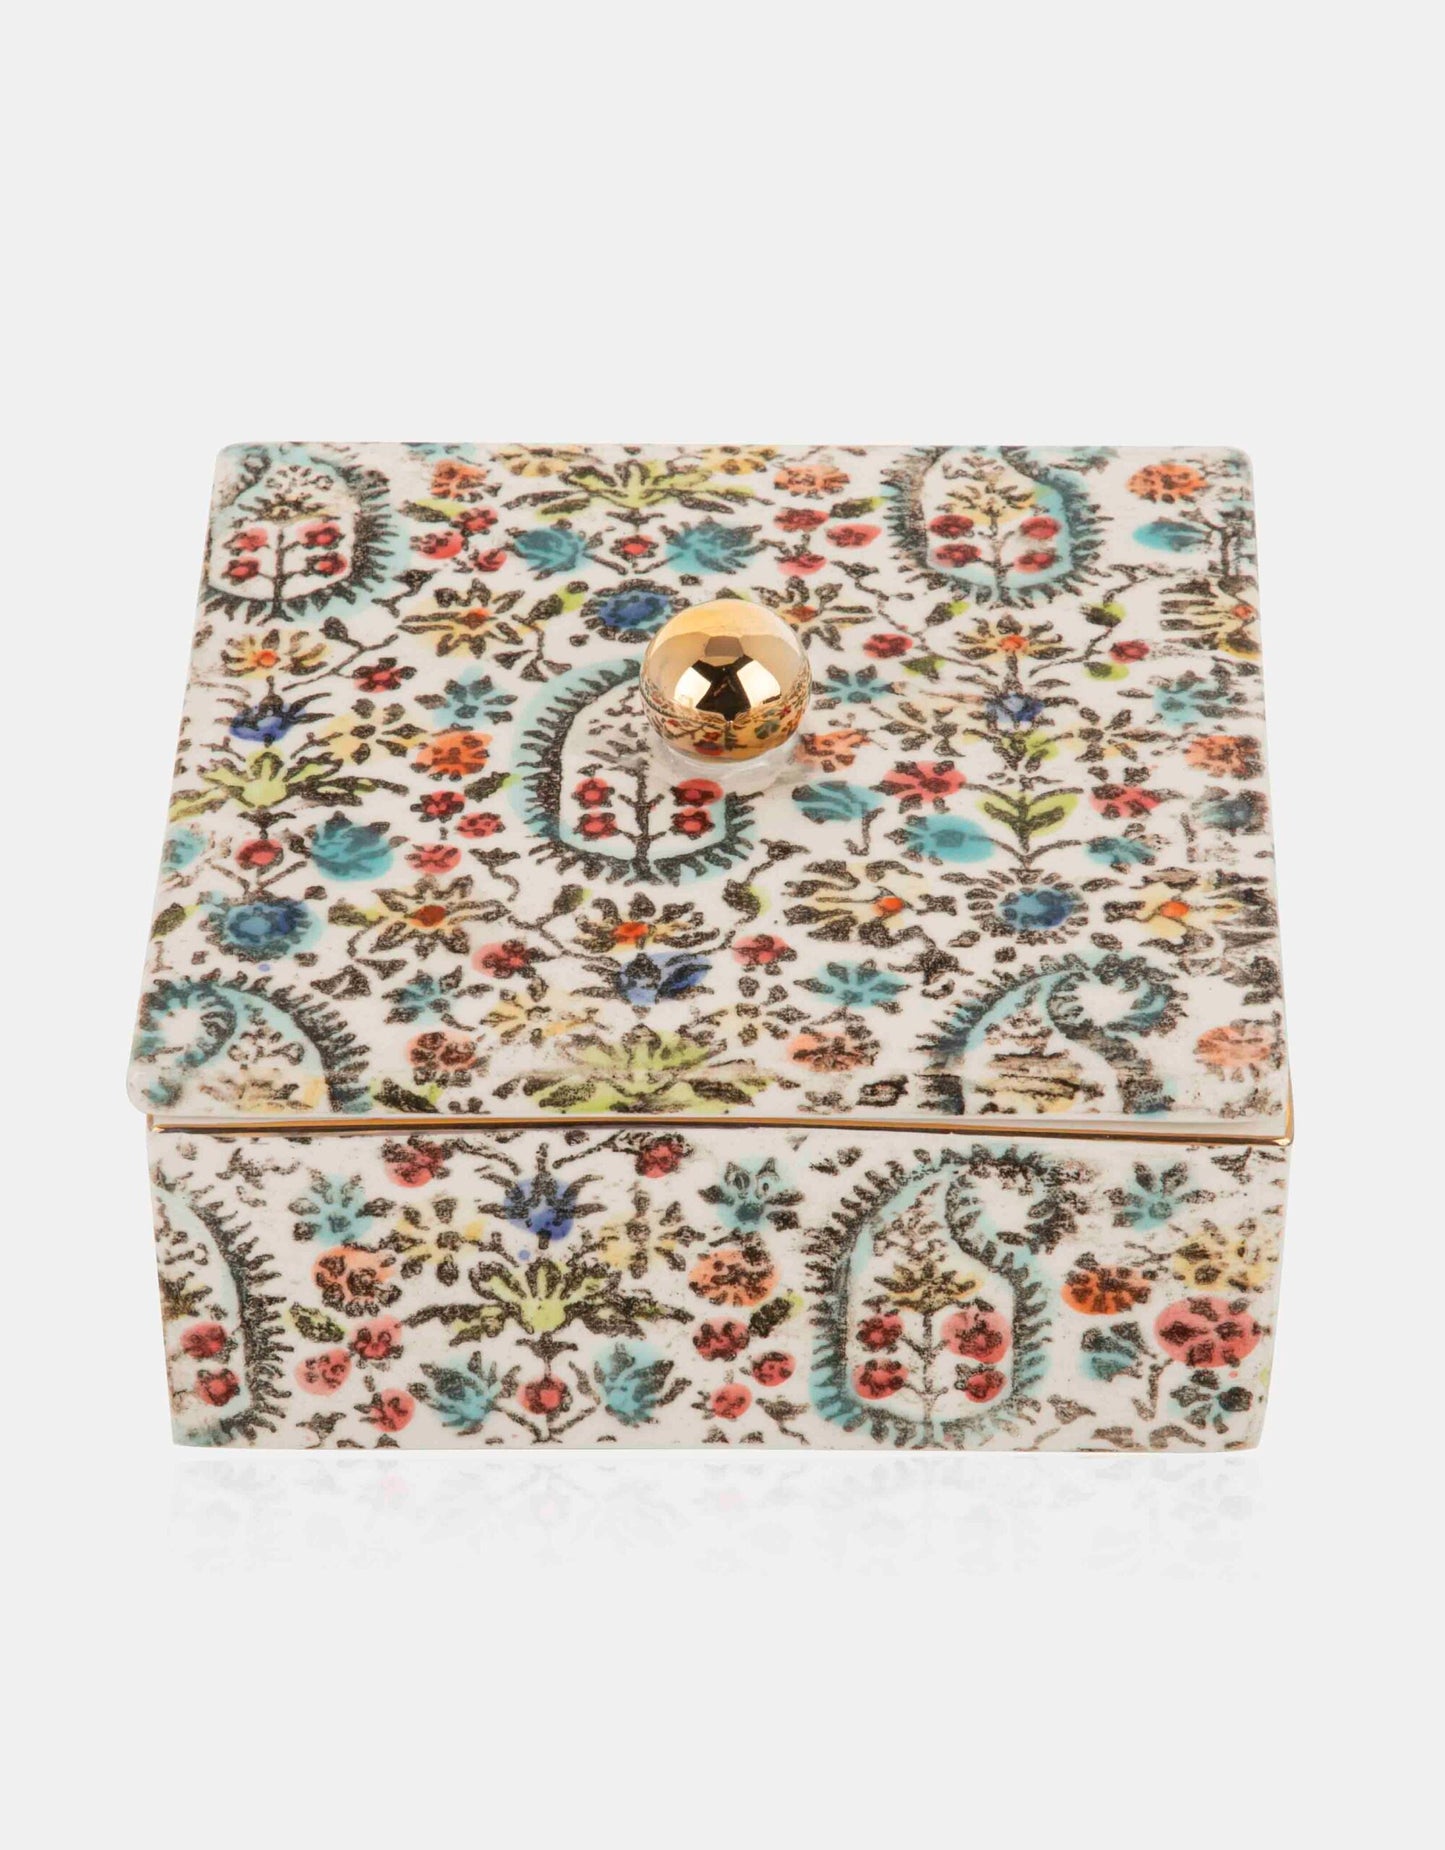 Square floral trinket box with lid